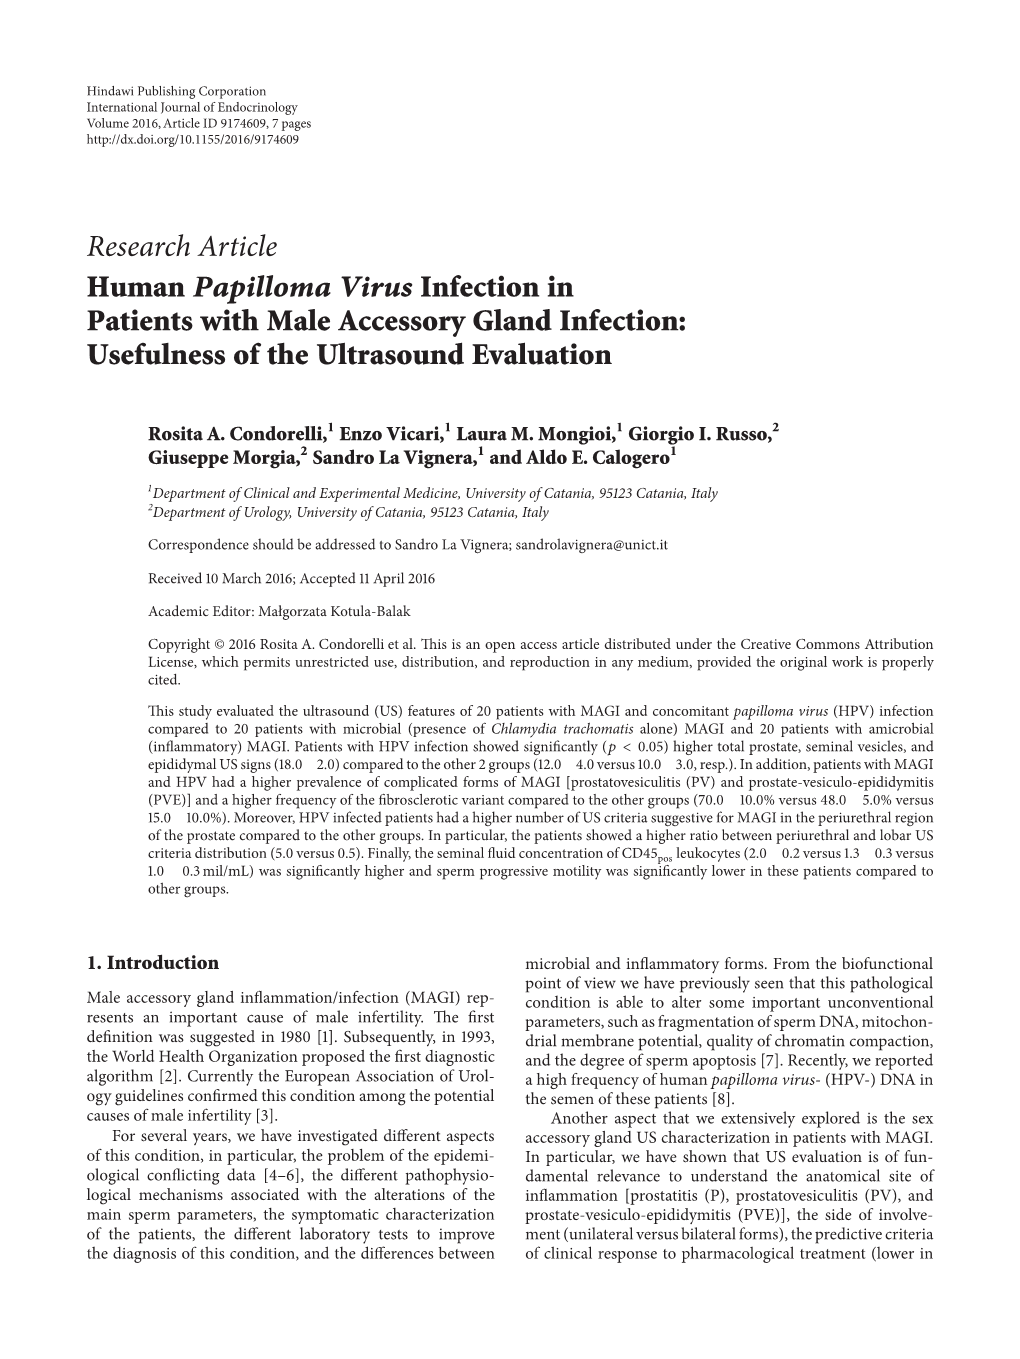 Human Papilloma Virus Infection in Patients with Male Accessory Gland Infection: Usefulness of the Ultrasound Evaluation